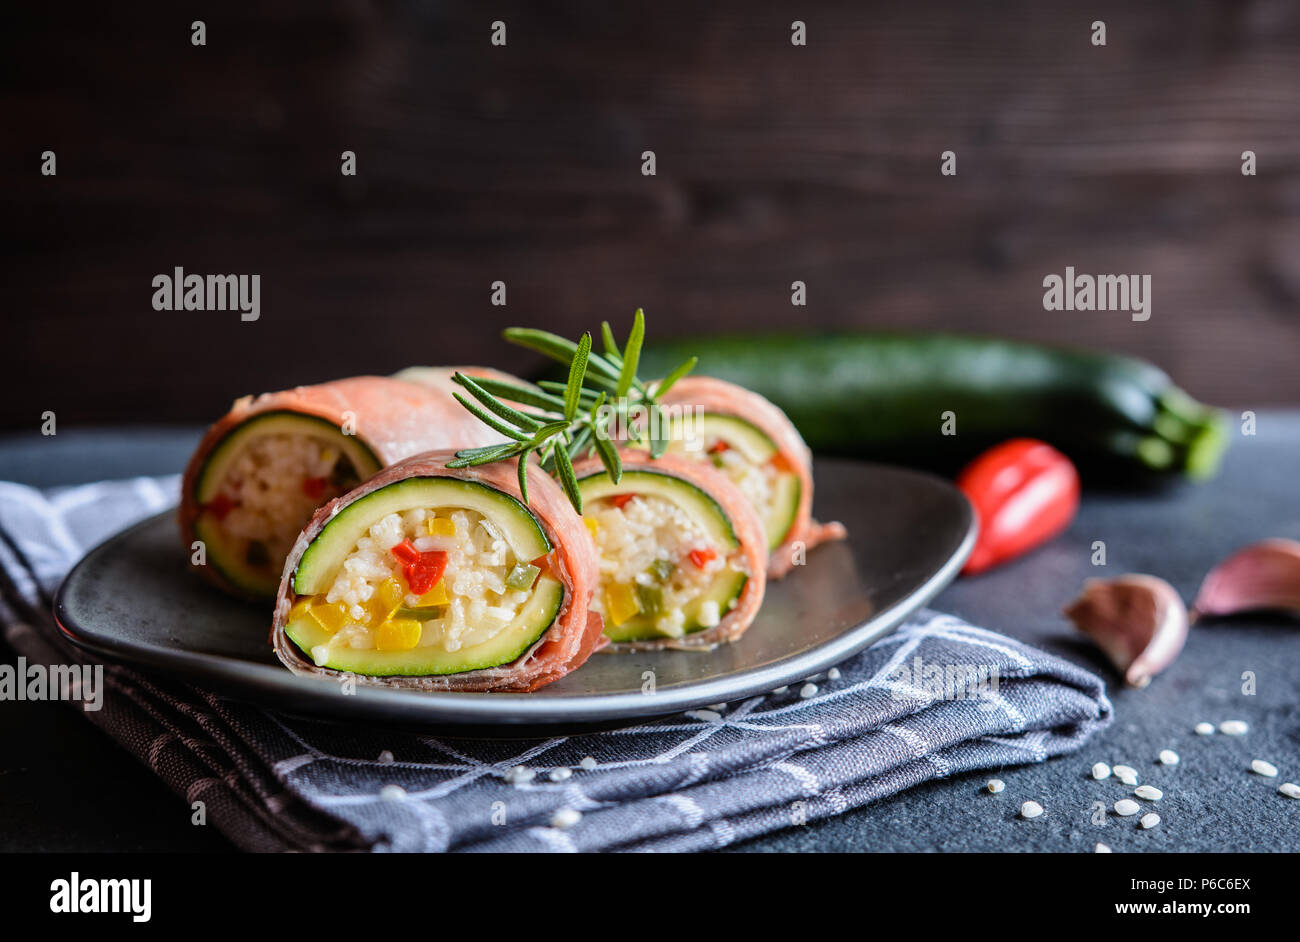 Roasted zucchini stuffed with rice, cheese, pepper and wrapped in Prosciutto slices Stock Photo